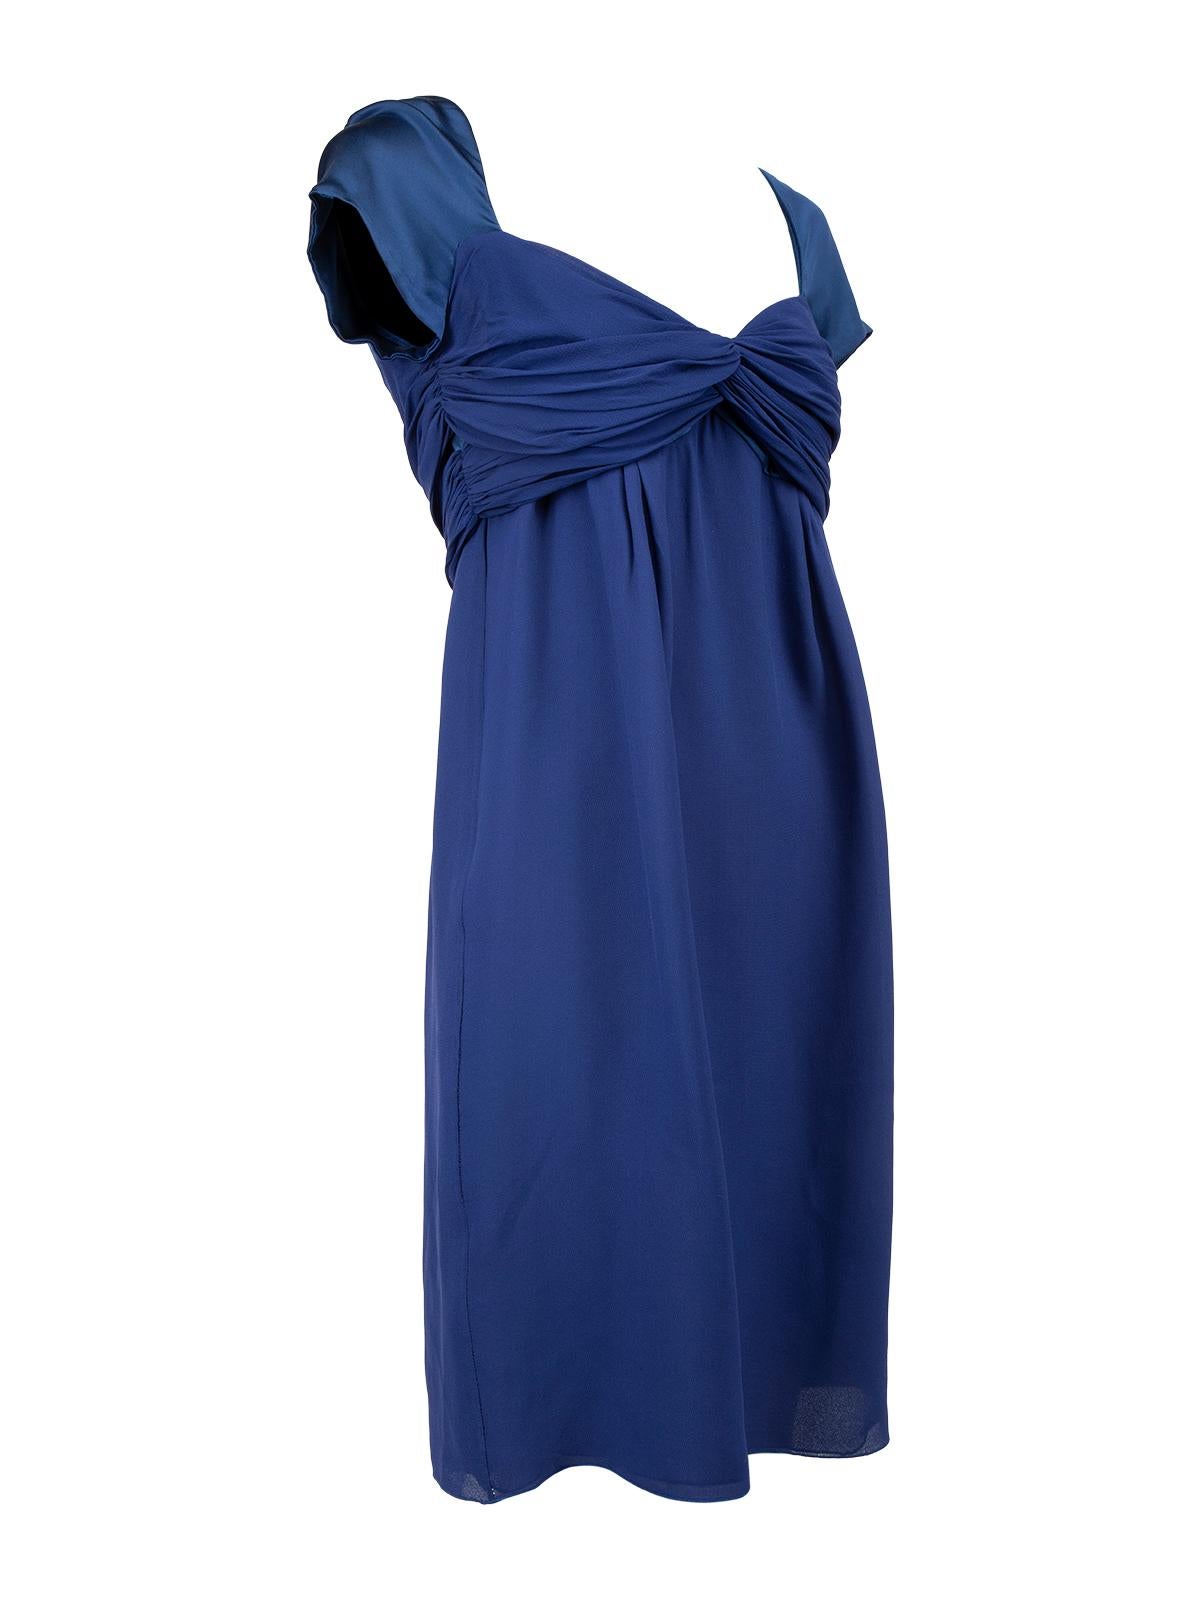 CONDITION is Very good. Minimal wear to dress is evident. Minimal wear around the shoulders on this used Valentino designer resale item. Details Blue Silk Body con dress Mini Square sweetheart neckline Ruched detail on breast Short cap sleeves Back